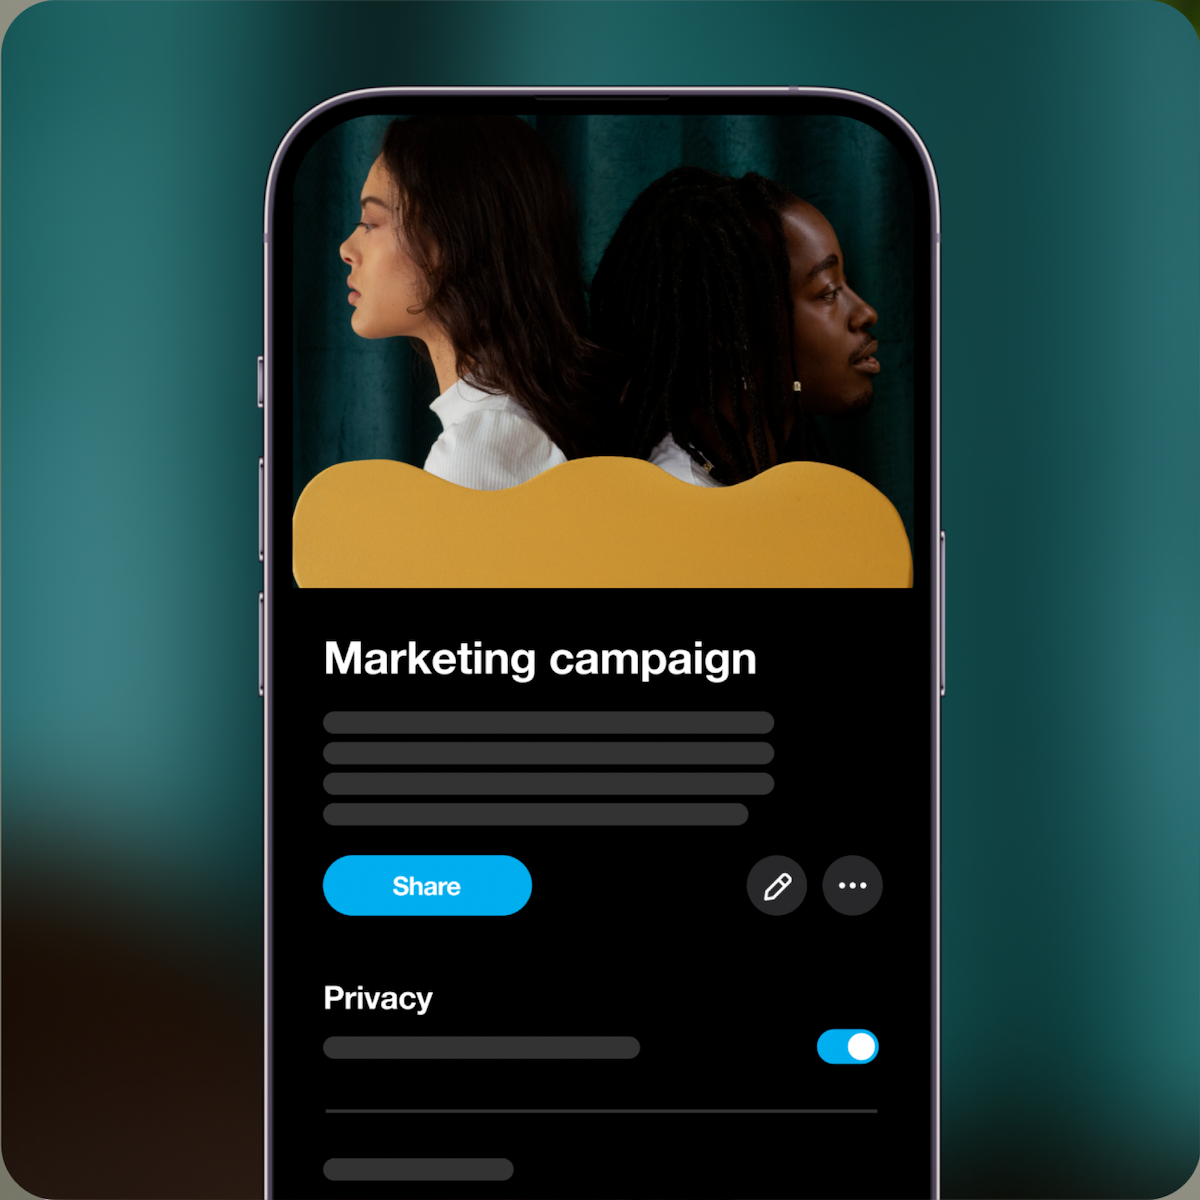 Mobile phone screen showing an image of two people back to back with the words Marketing Campaign underneath